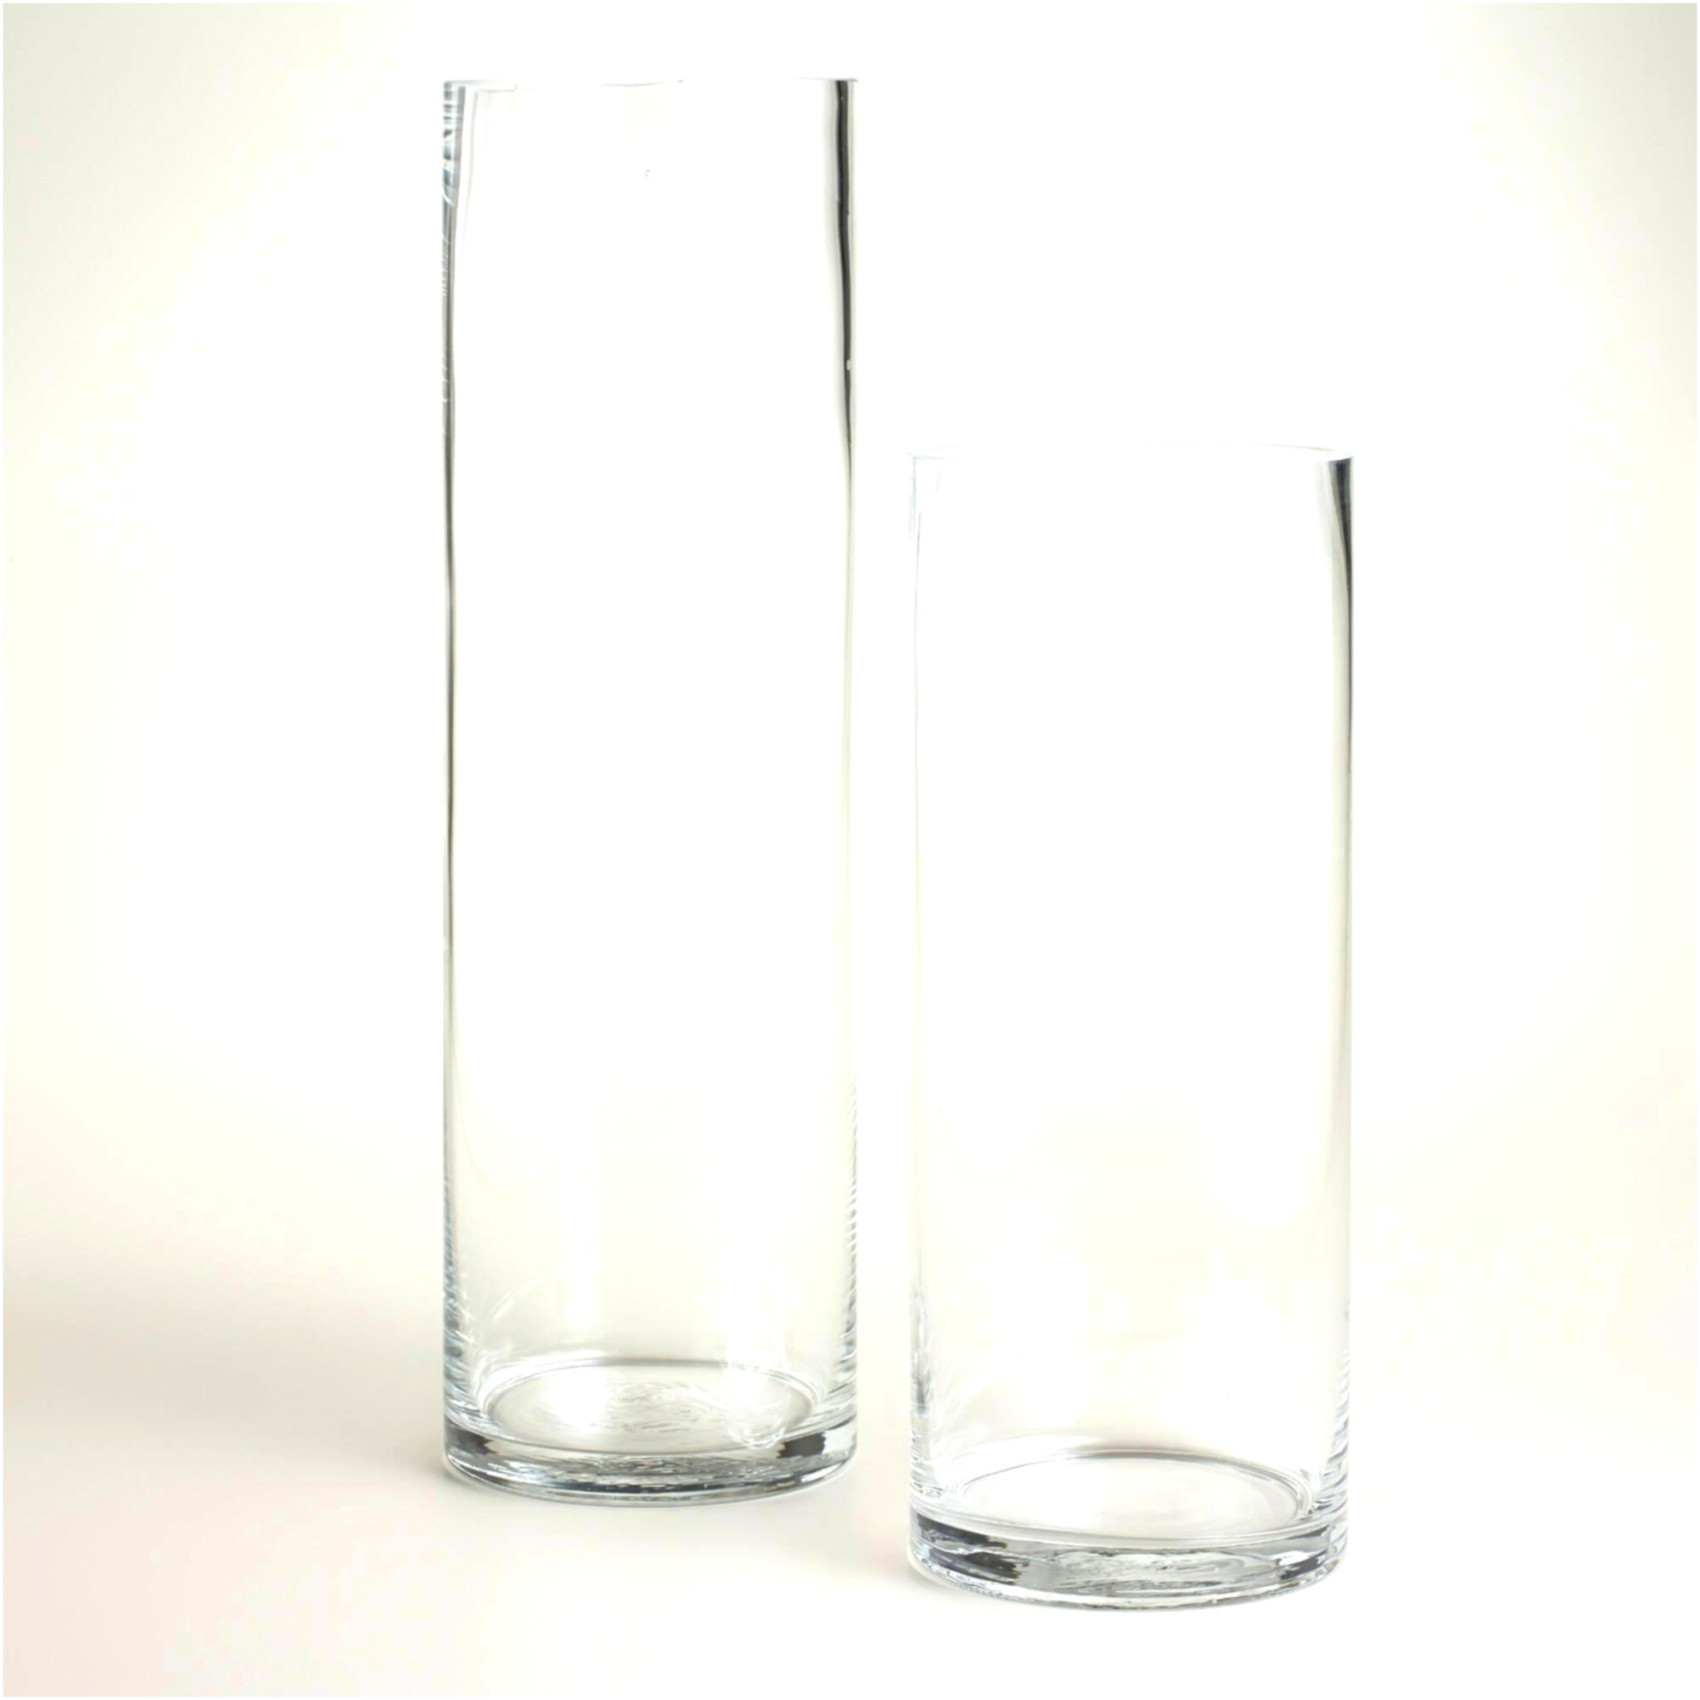 18 Ideal 6 Inch Crystal Vase 2024 free download 6 inch crystal vase of why you should not go to glass vases wholesale glass vases with regard to crystal glass vases wholesale inspirational 30 elegant vases with